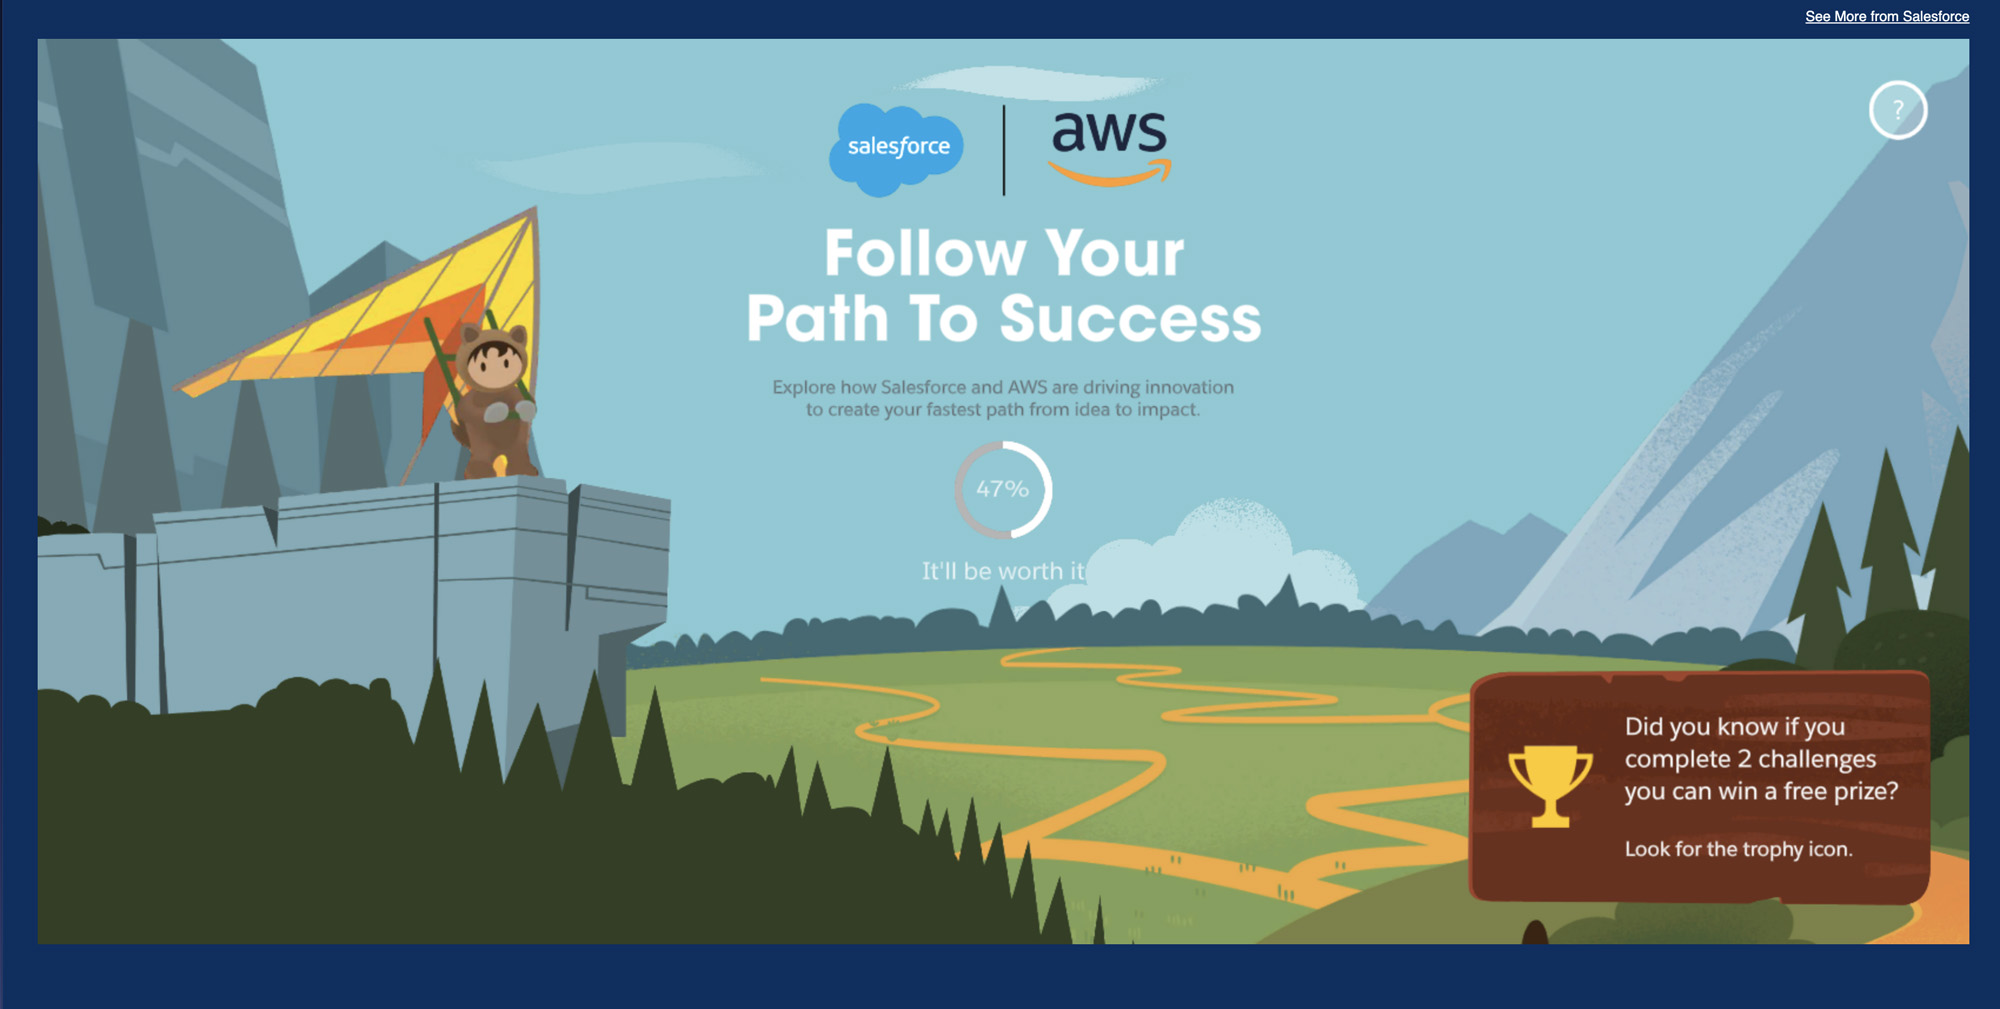 Salesforce Strategic Partners, Google and AWS by Marcus Guttenplan for Sparks